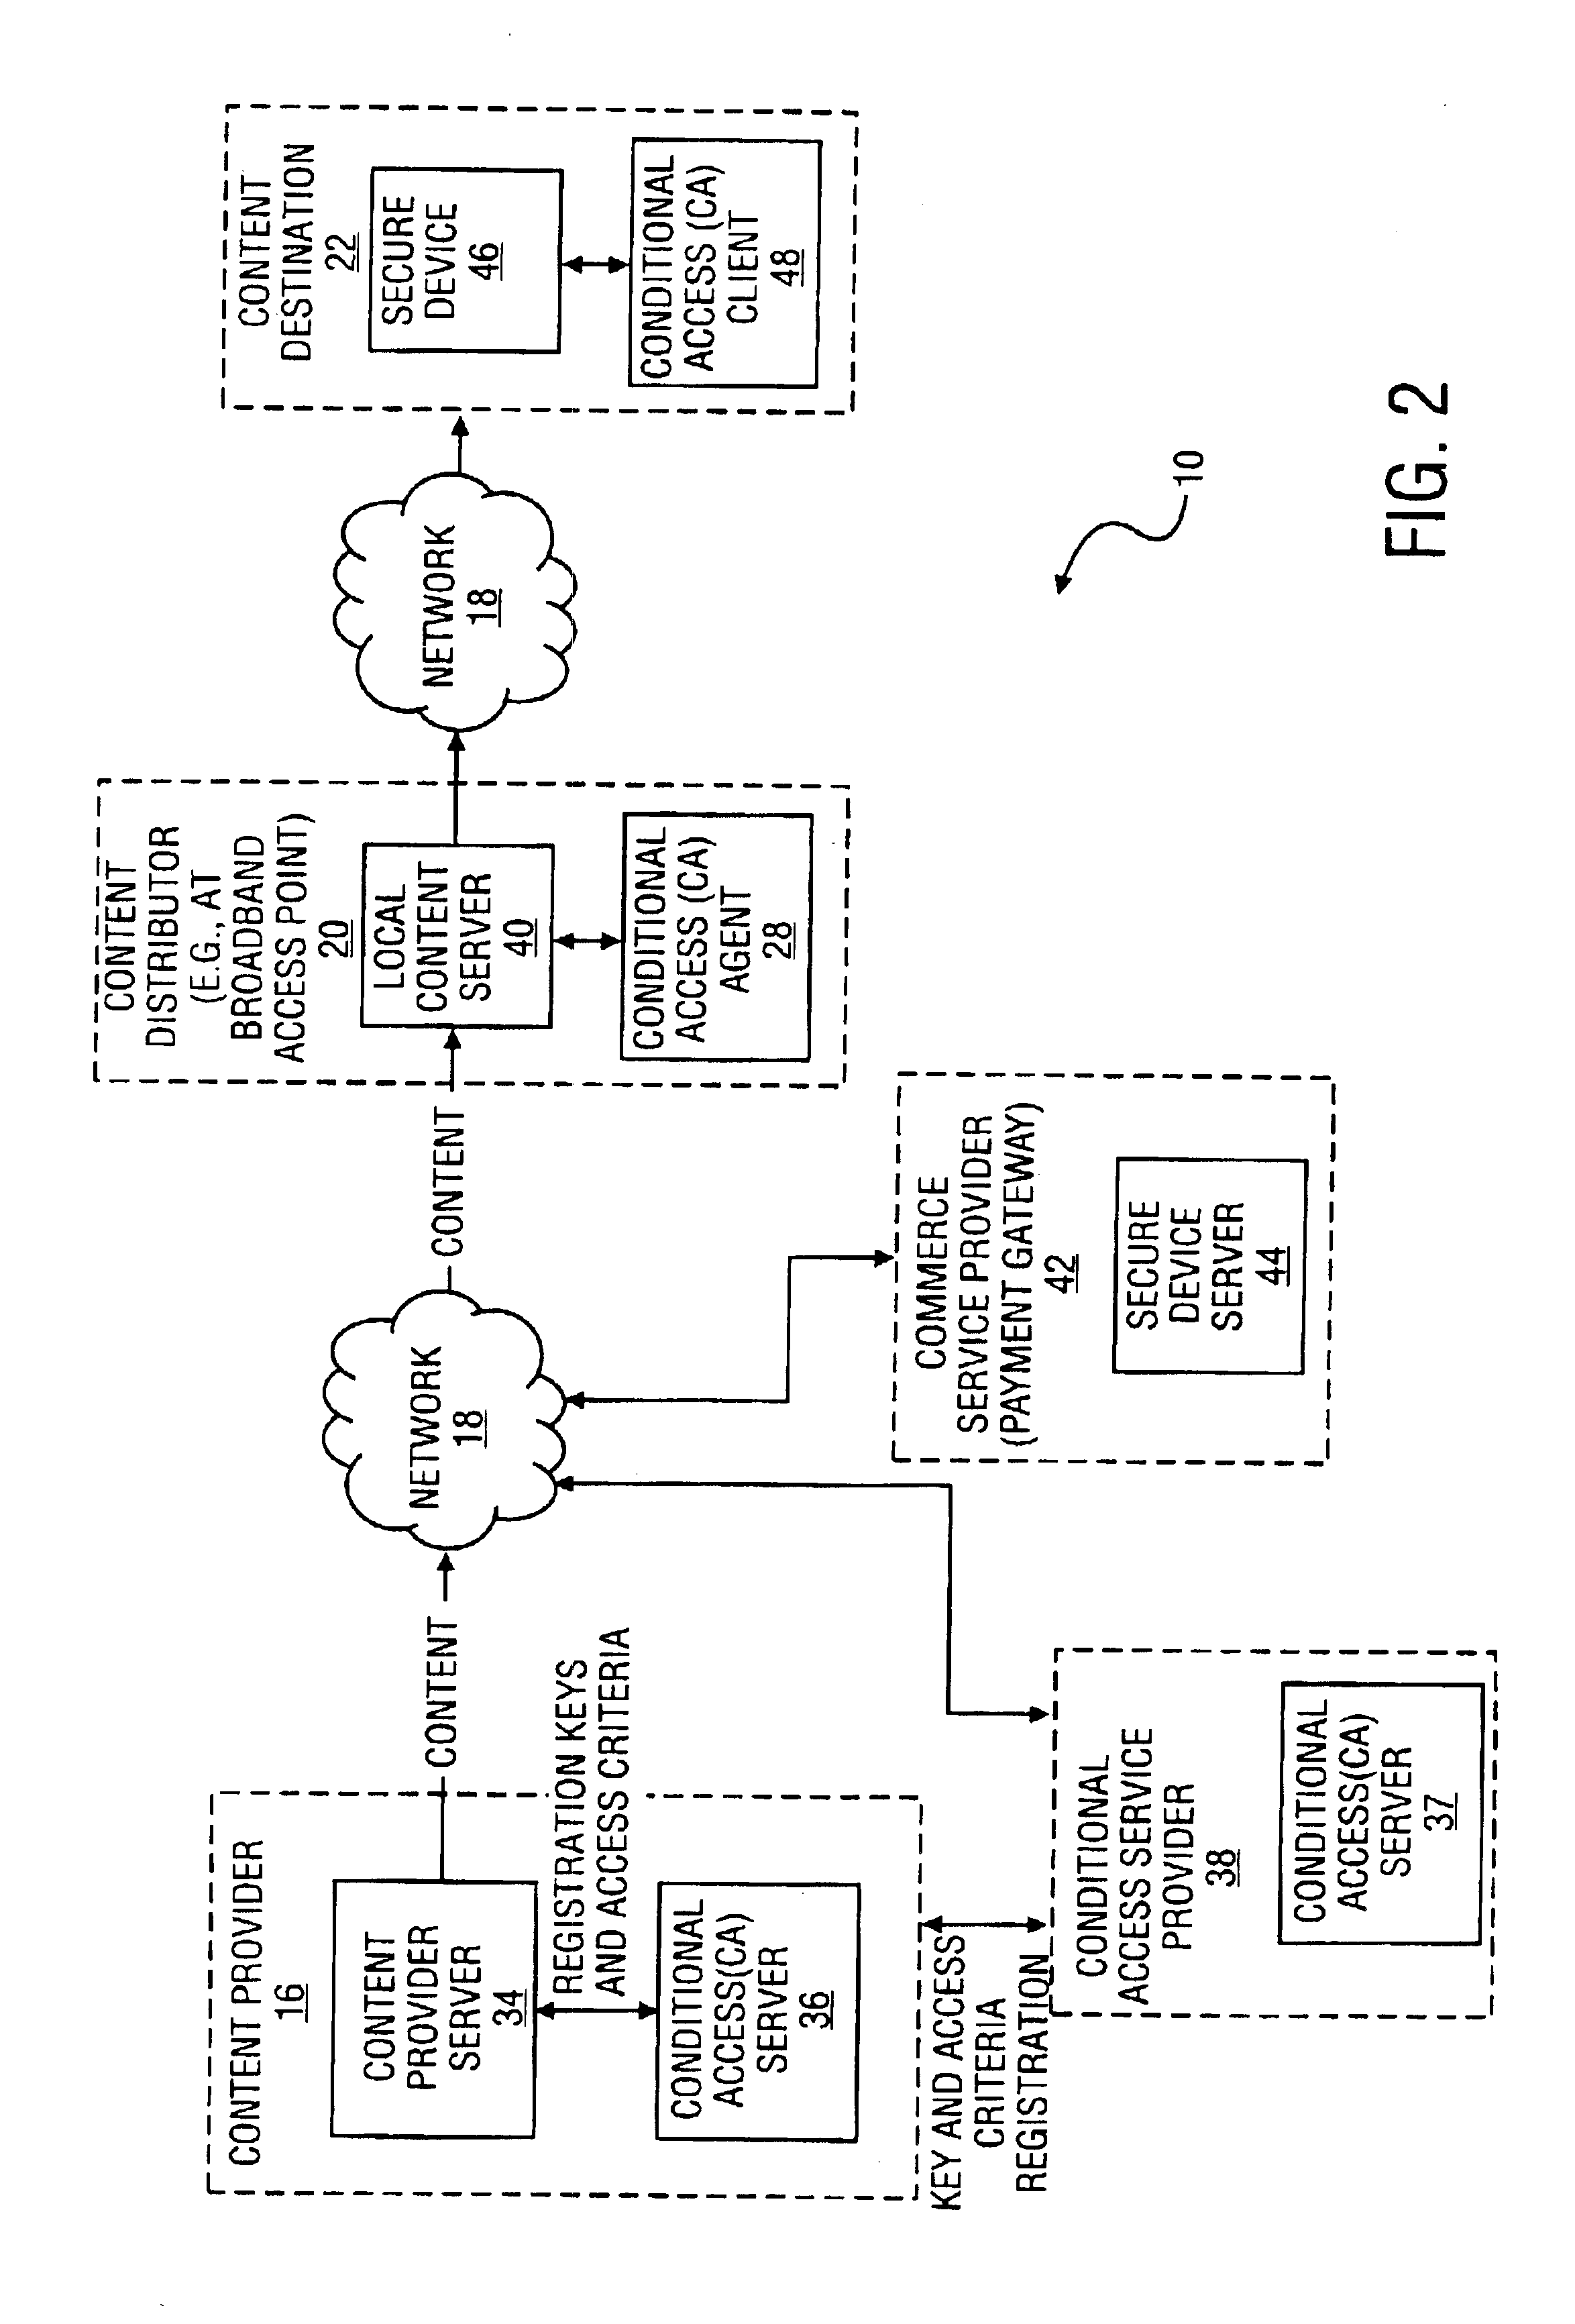 Method and system to secure content for distribution via a network